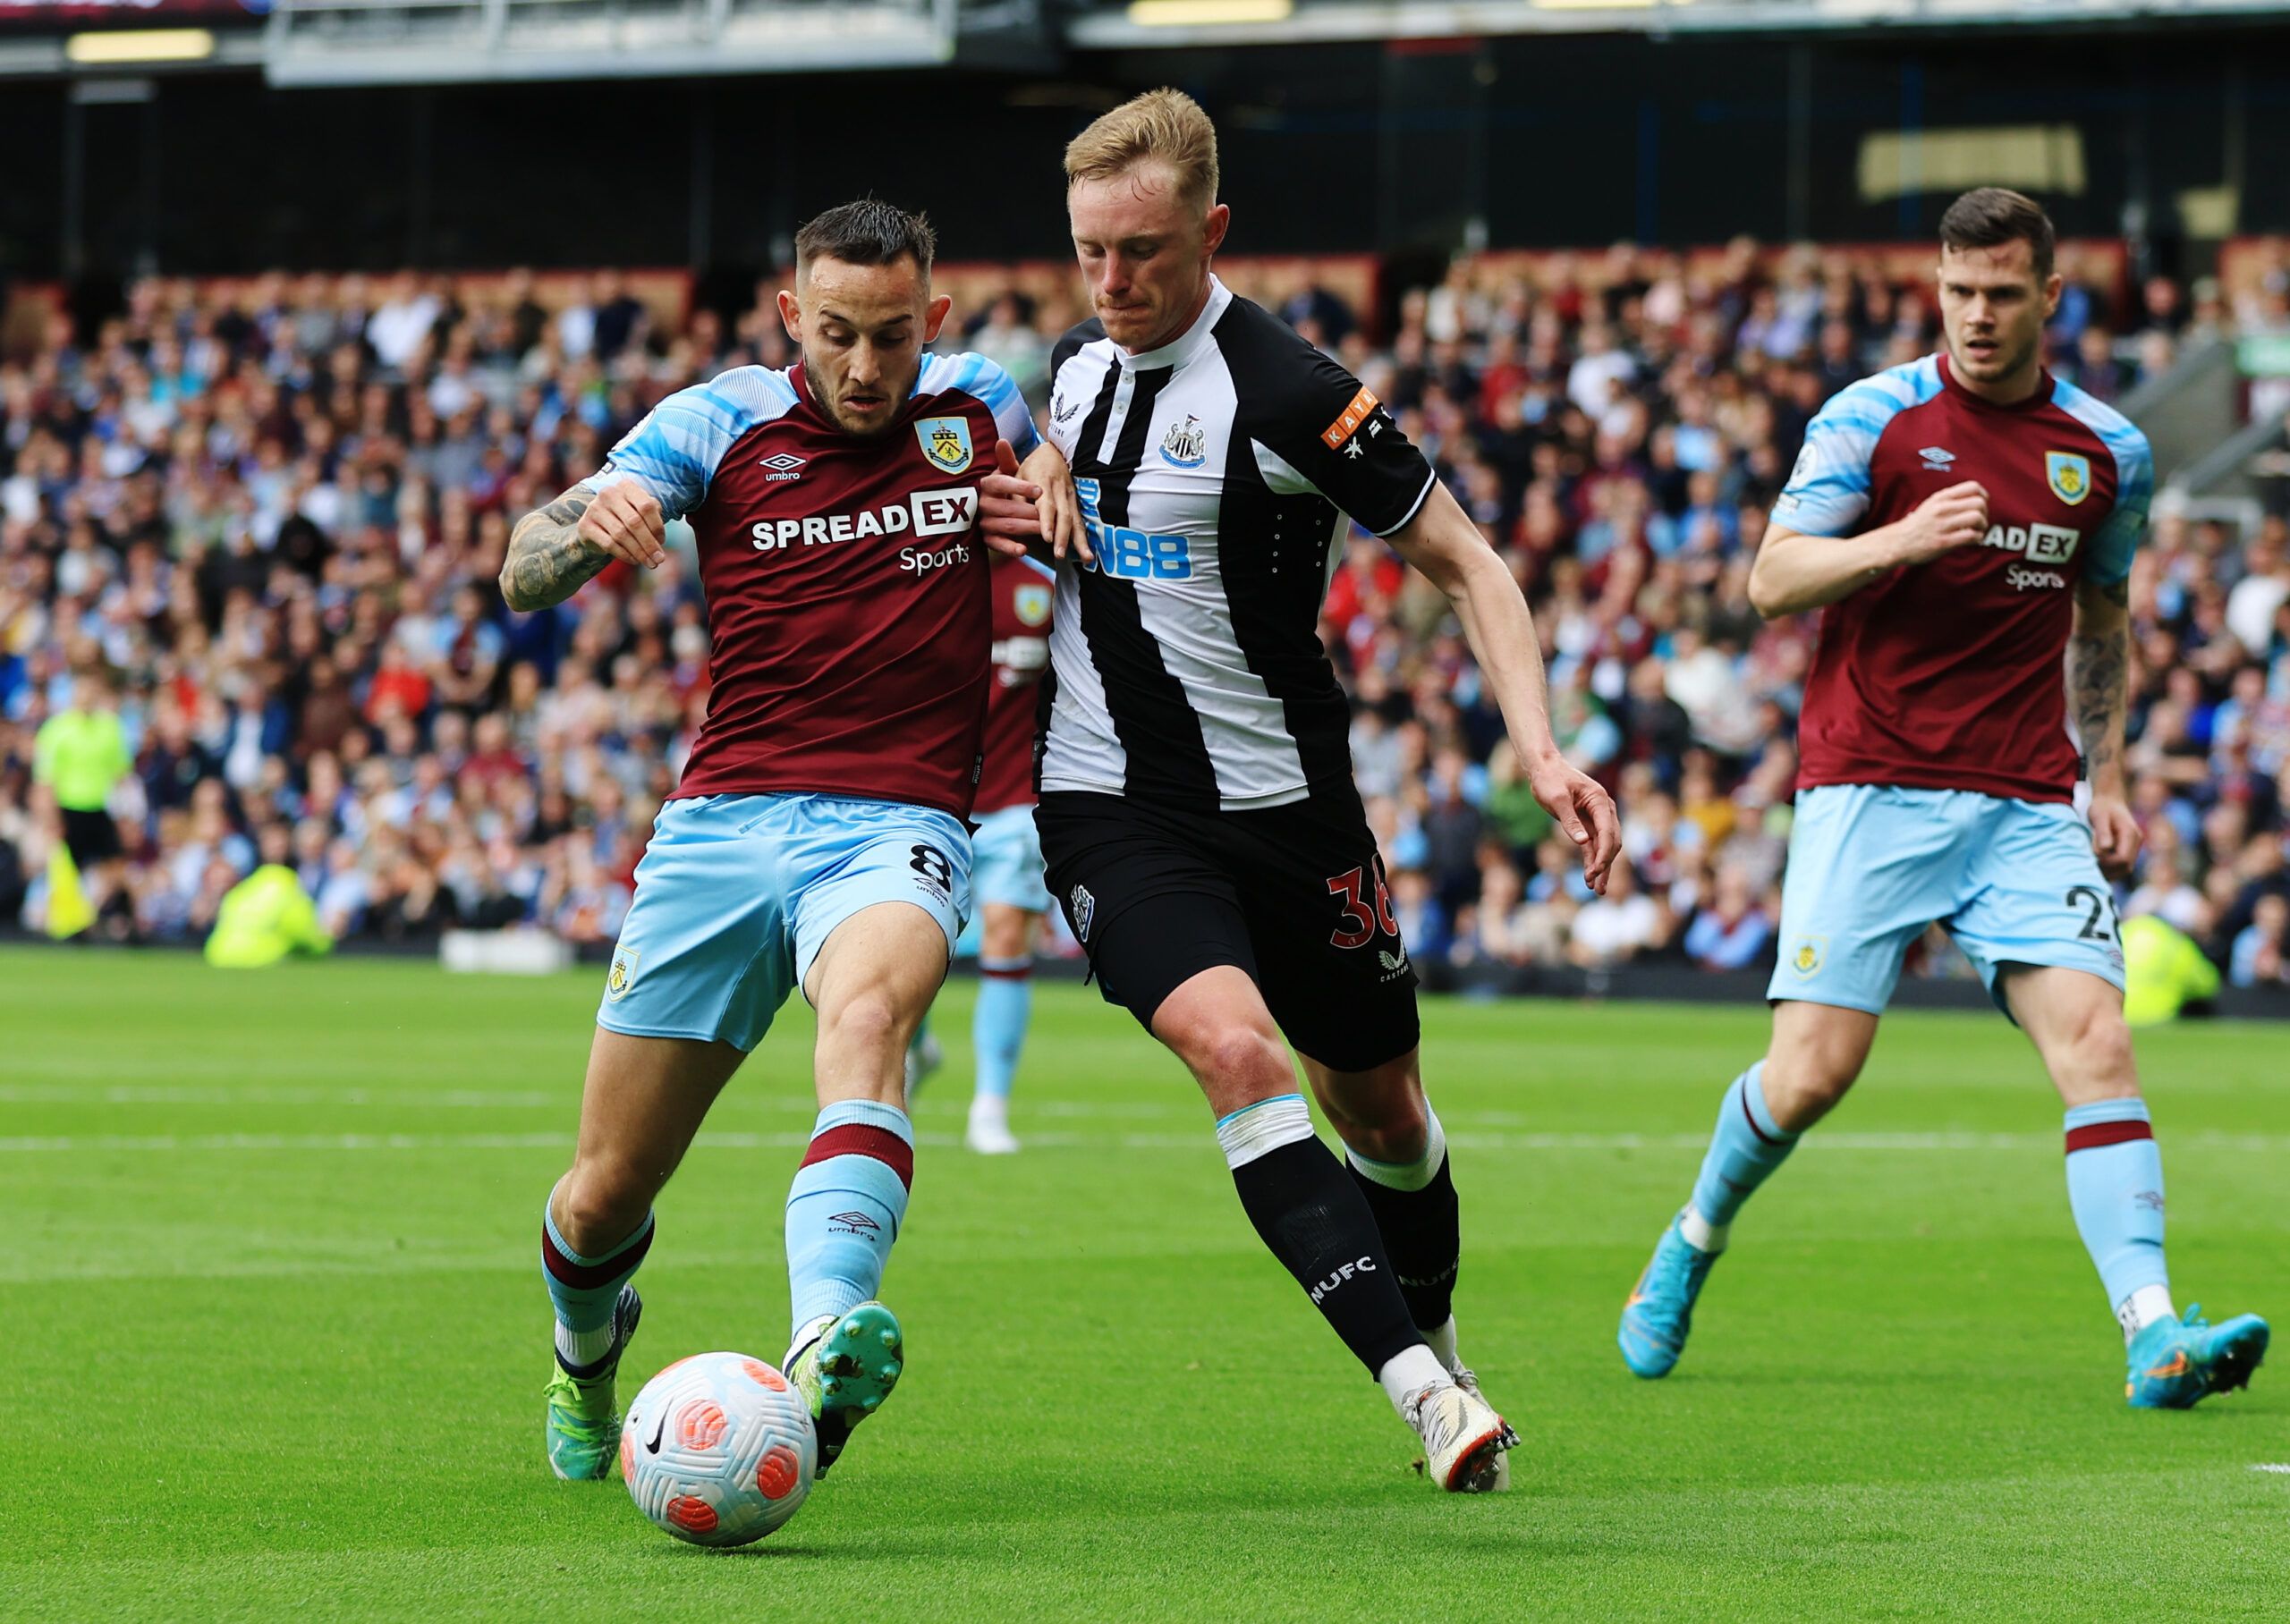 Soccer Football - Premier League - Burnley v Newcastle United - Turf Moor, Burnley, Britain - May 22, 2022 Burnley's Josh Brownhill in action with Newcastle United's Sean Longstaff Action Images via Reuters/Lee Smith EDITORIAL USE ONLY. No use with unauthorized audio, video, data, fixture lists, club/league logos or 'live' services. Online in-match use limited to 75 images, no video emulation. No use in betting, games or single club /league/player publications.  Please contact your account repre